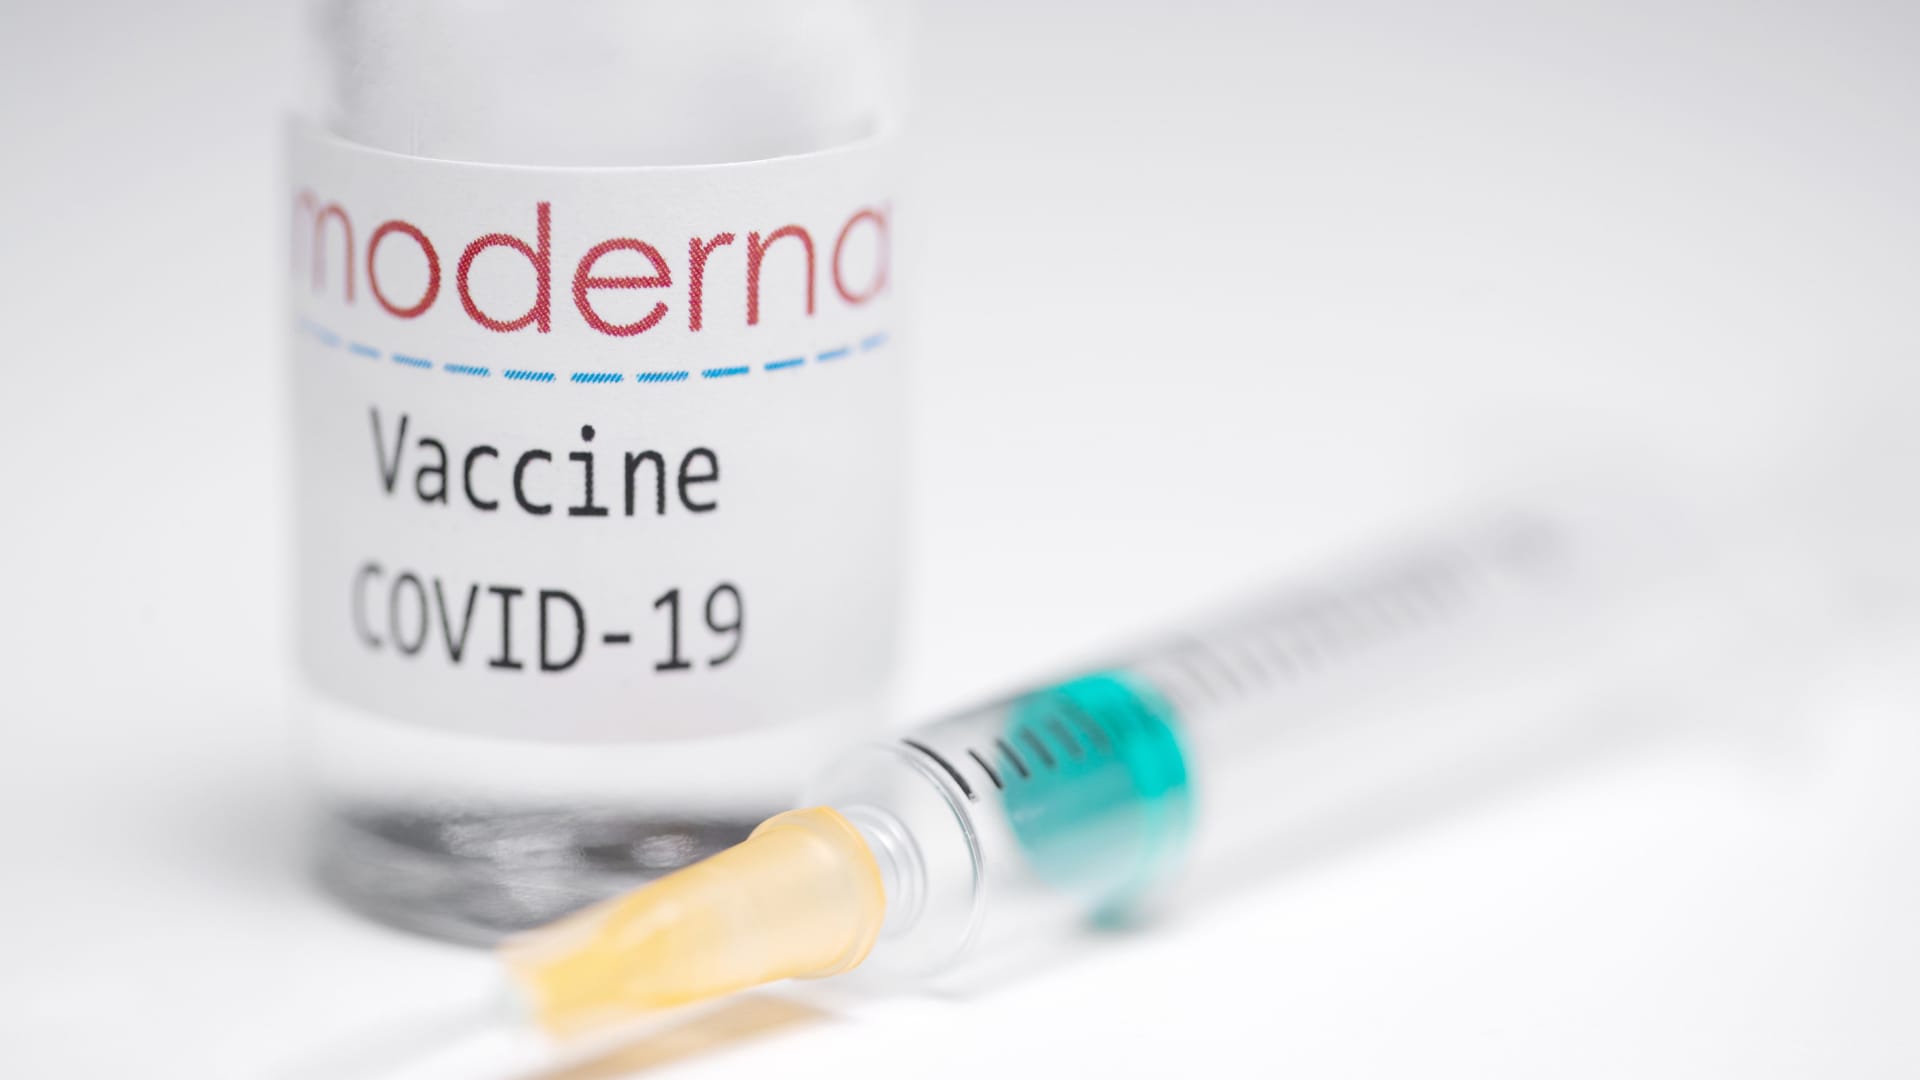 This creative image taken in a studio in Paris on November 16, 2020, showing a syringe and a vaccine vial with the reproducted logo of a US biotech firm Moderna, illustrates the announcement of an experimental vaccine against Covid-19 from Moderna that would be nearly 95% effective, marking a second major step forward in the quest to end the Covid-19 pandemic.